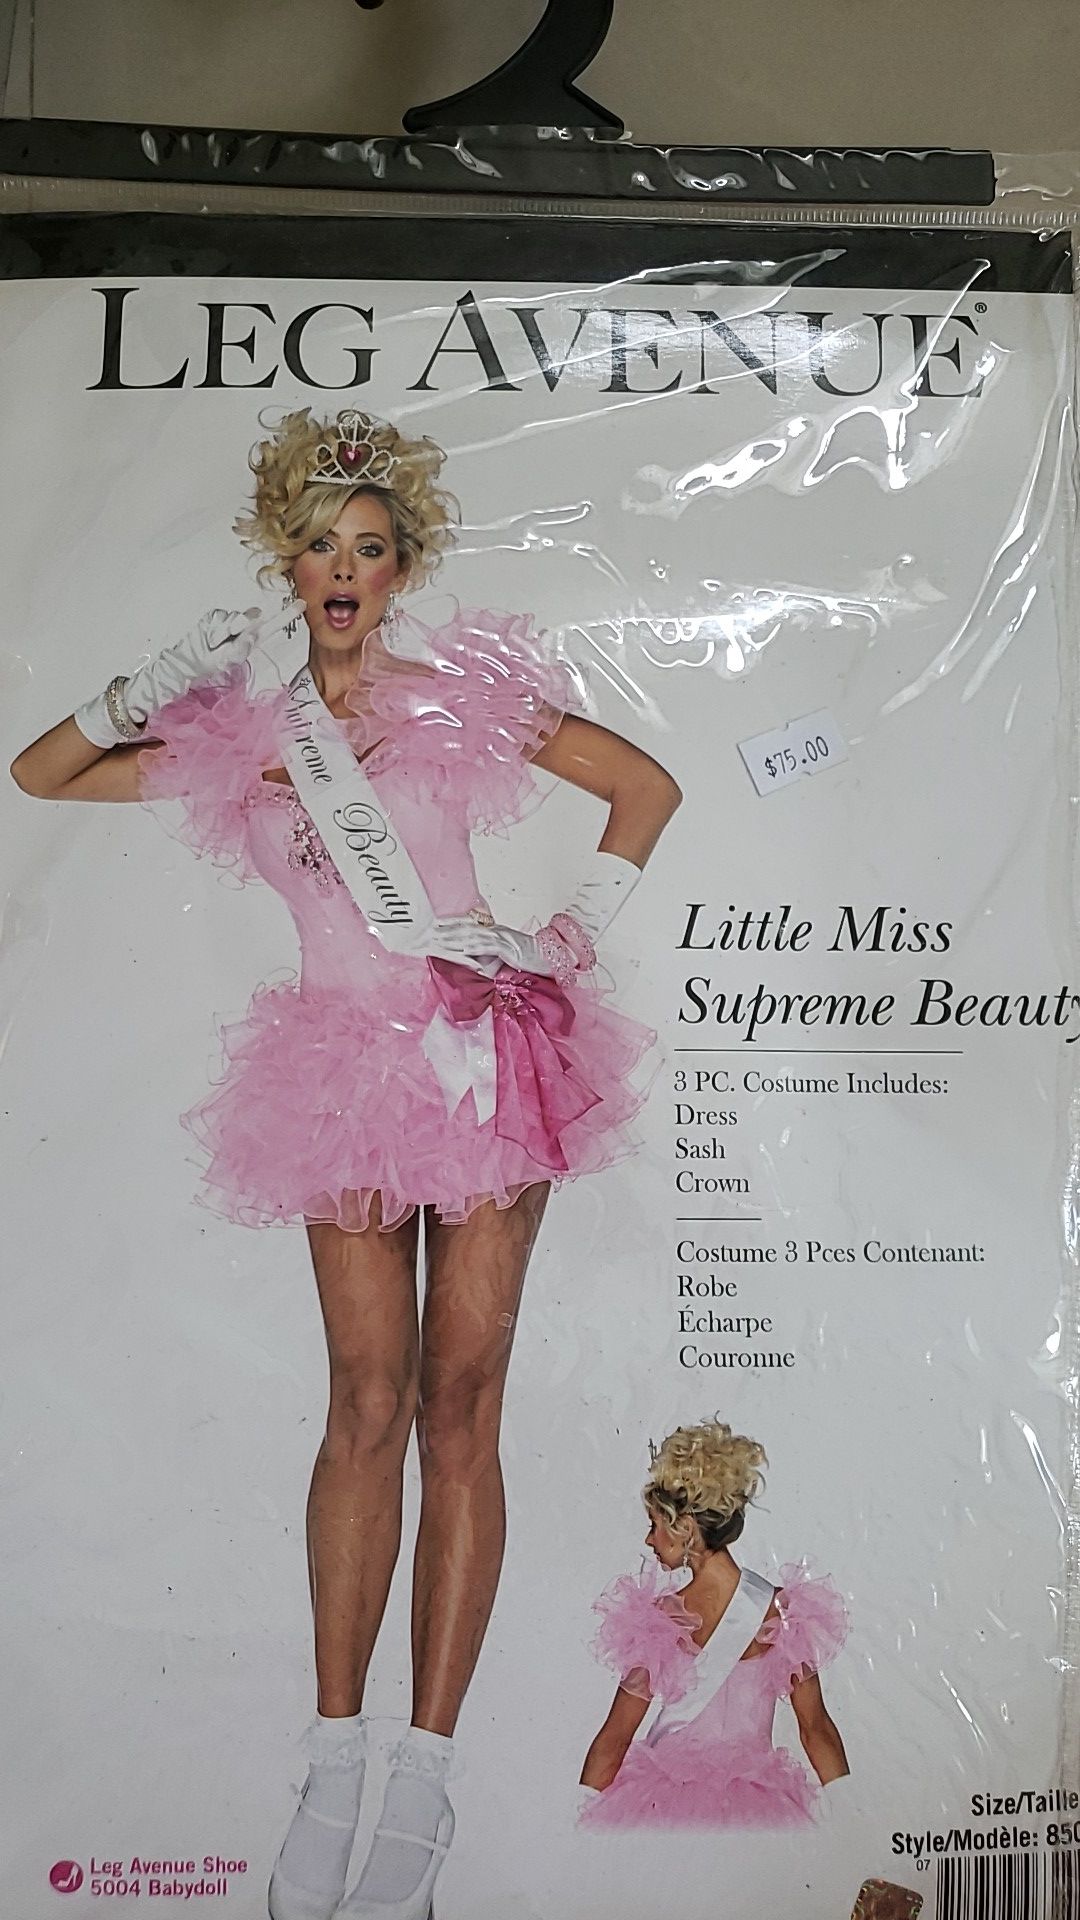 Halloween Princess or Miss Supreme Beauty outfit size S